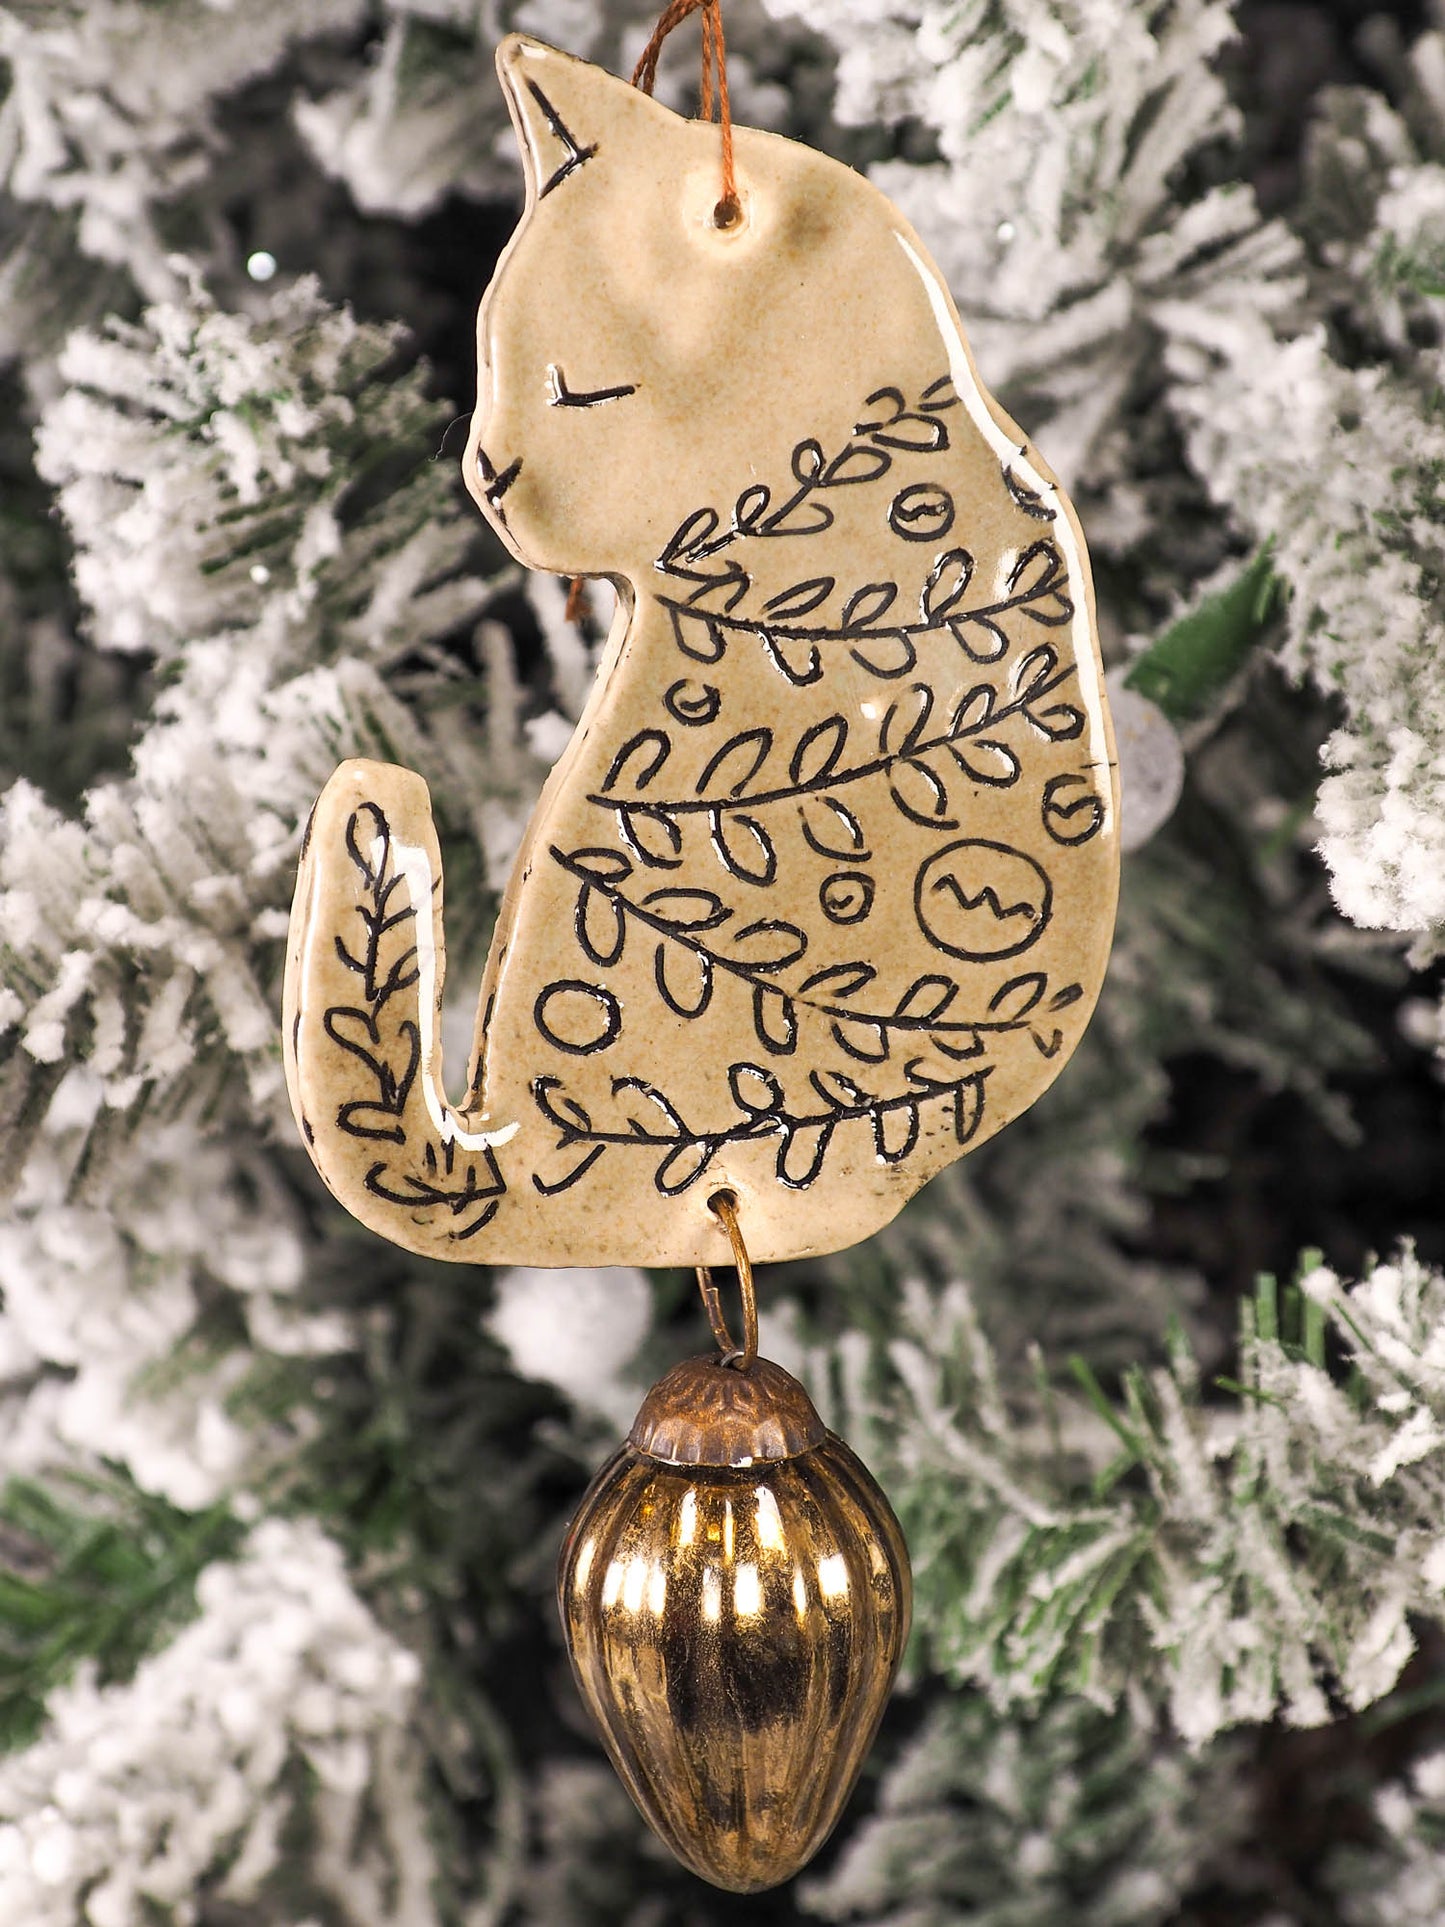 An original Christmas Holiday tree ornament ceramic cat, handmade by Idania Salcido the artist behind Danita Art. Glazed carved sgraffito stoneware, hand painted and decorated, it has a beautiful vintage glass tree ornament to adorn a unique holiday gift for family and friends. Christmas gift for animal and pet lovers.